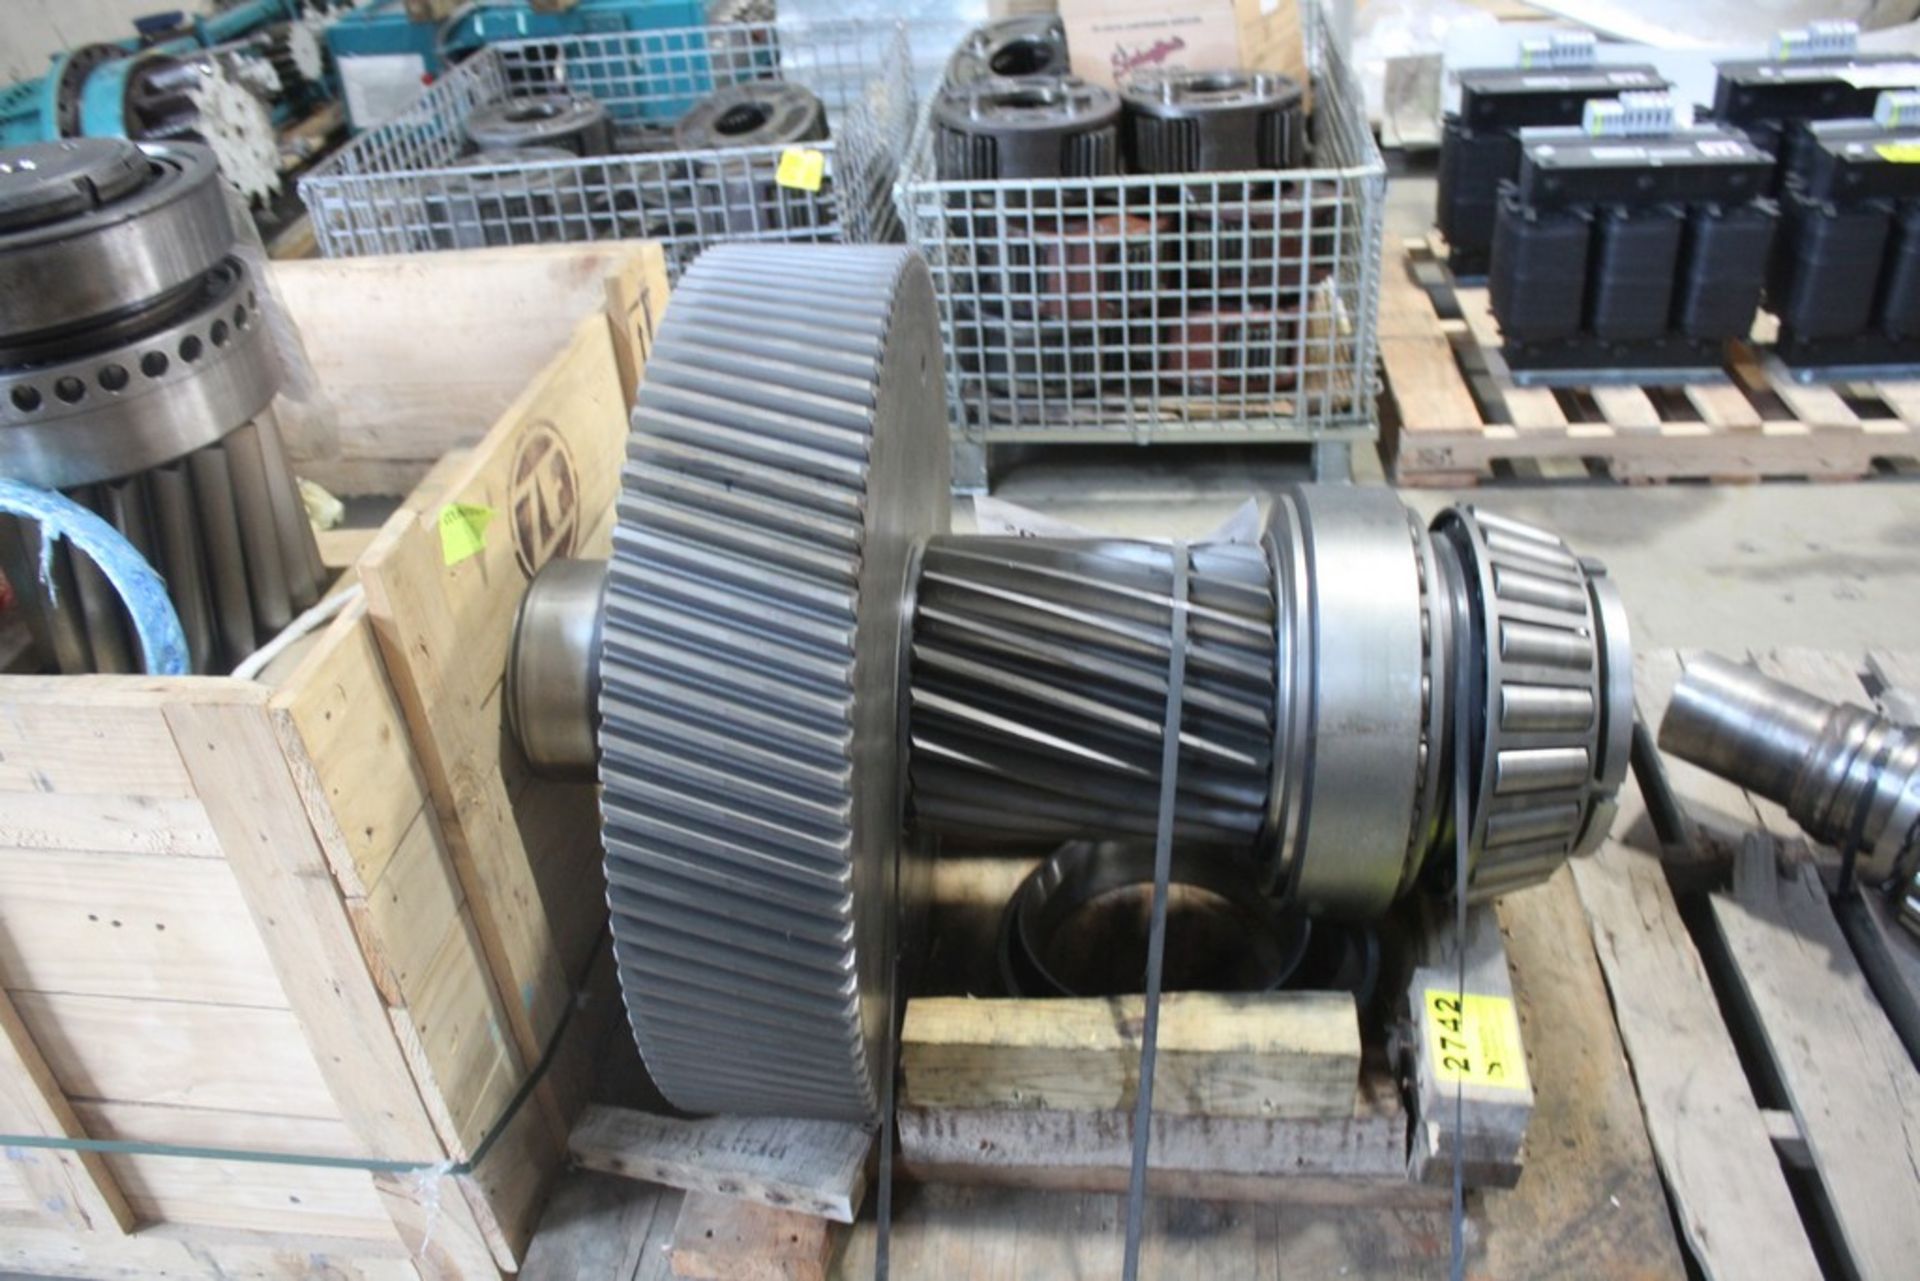 LARGE GEAR DRIVE ON PALLET